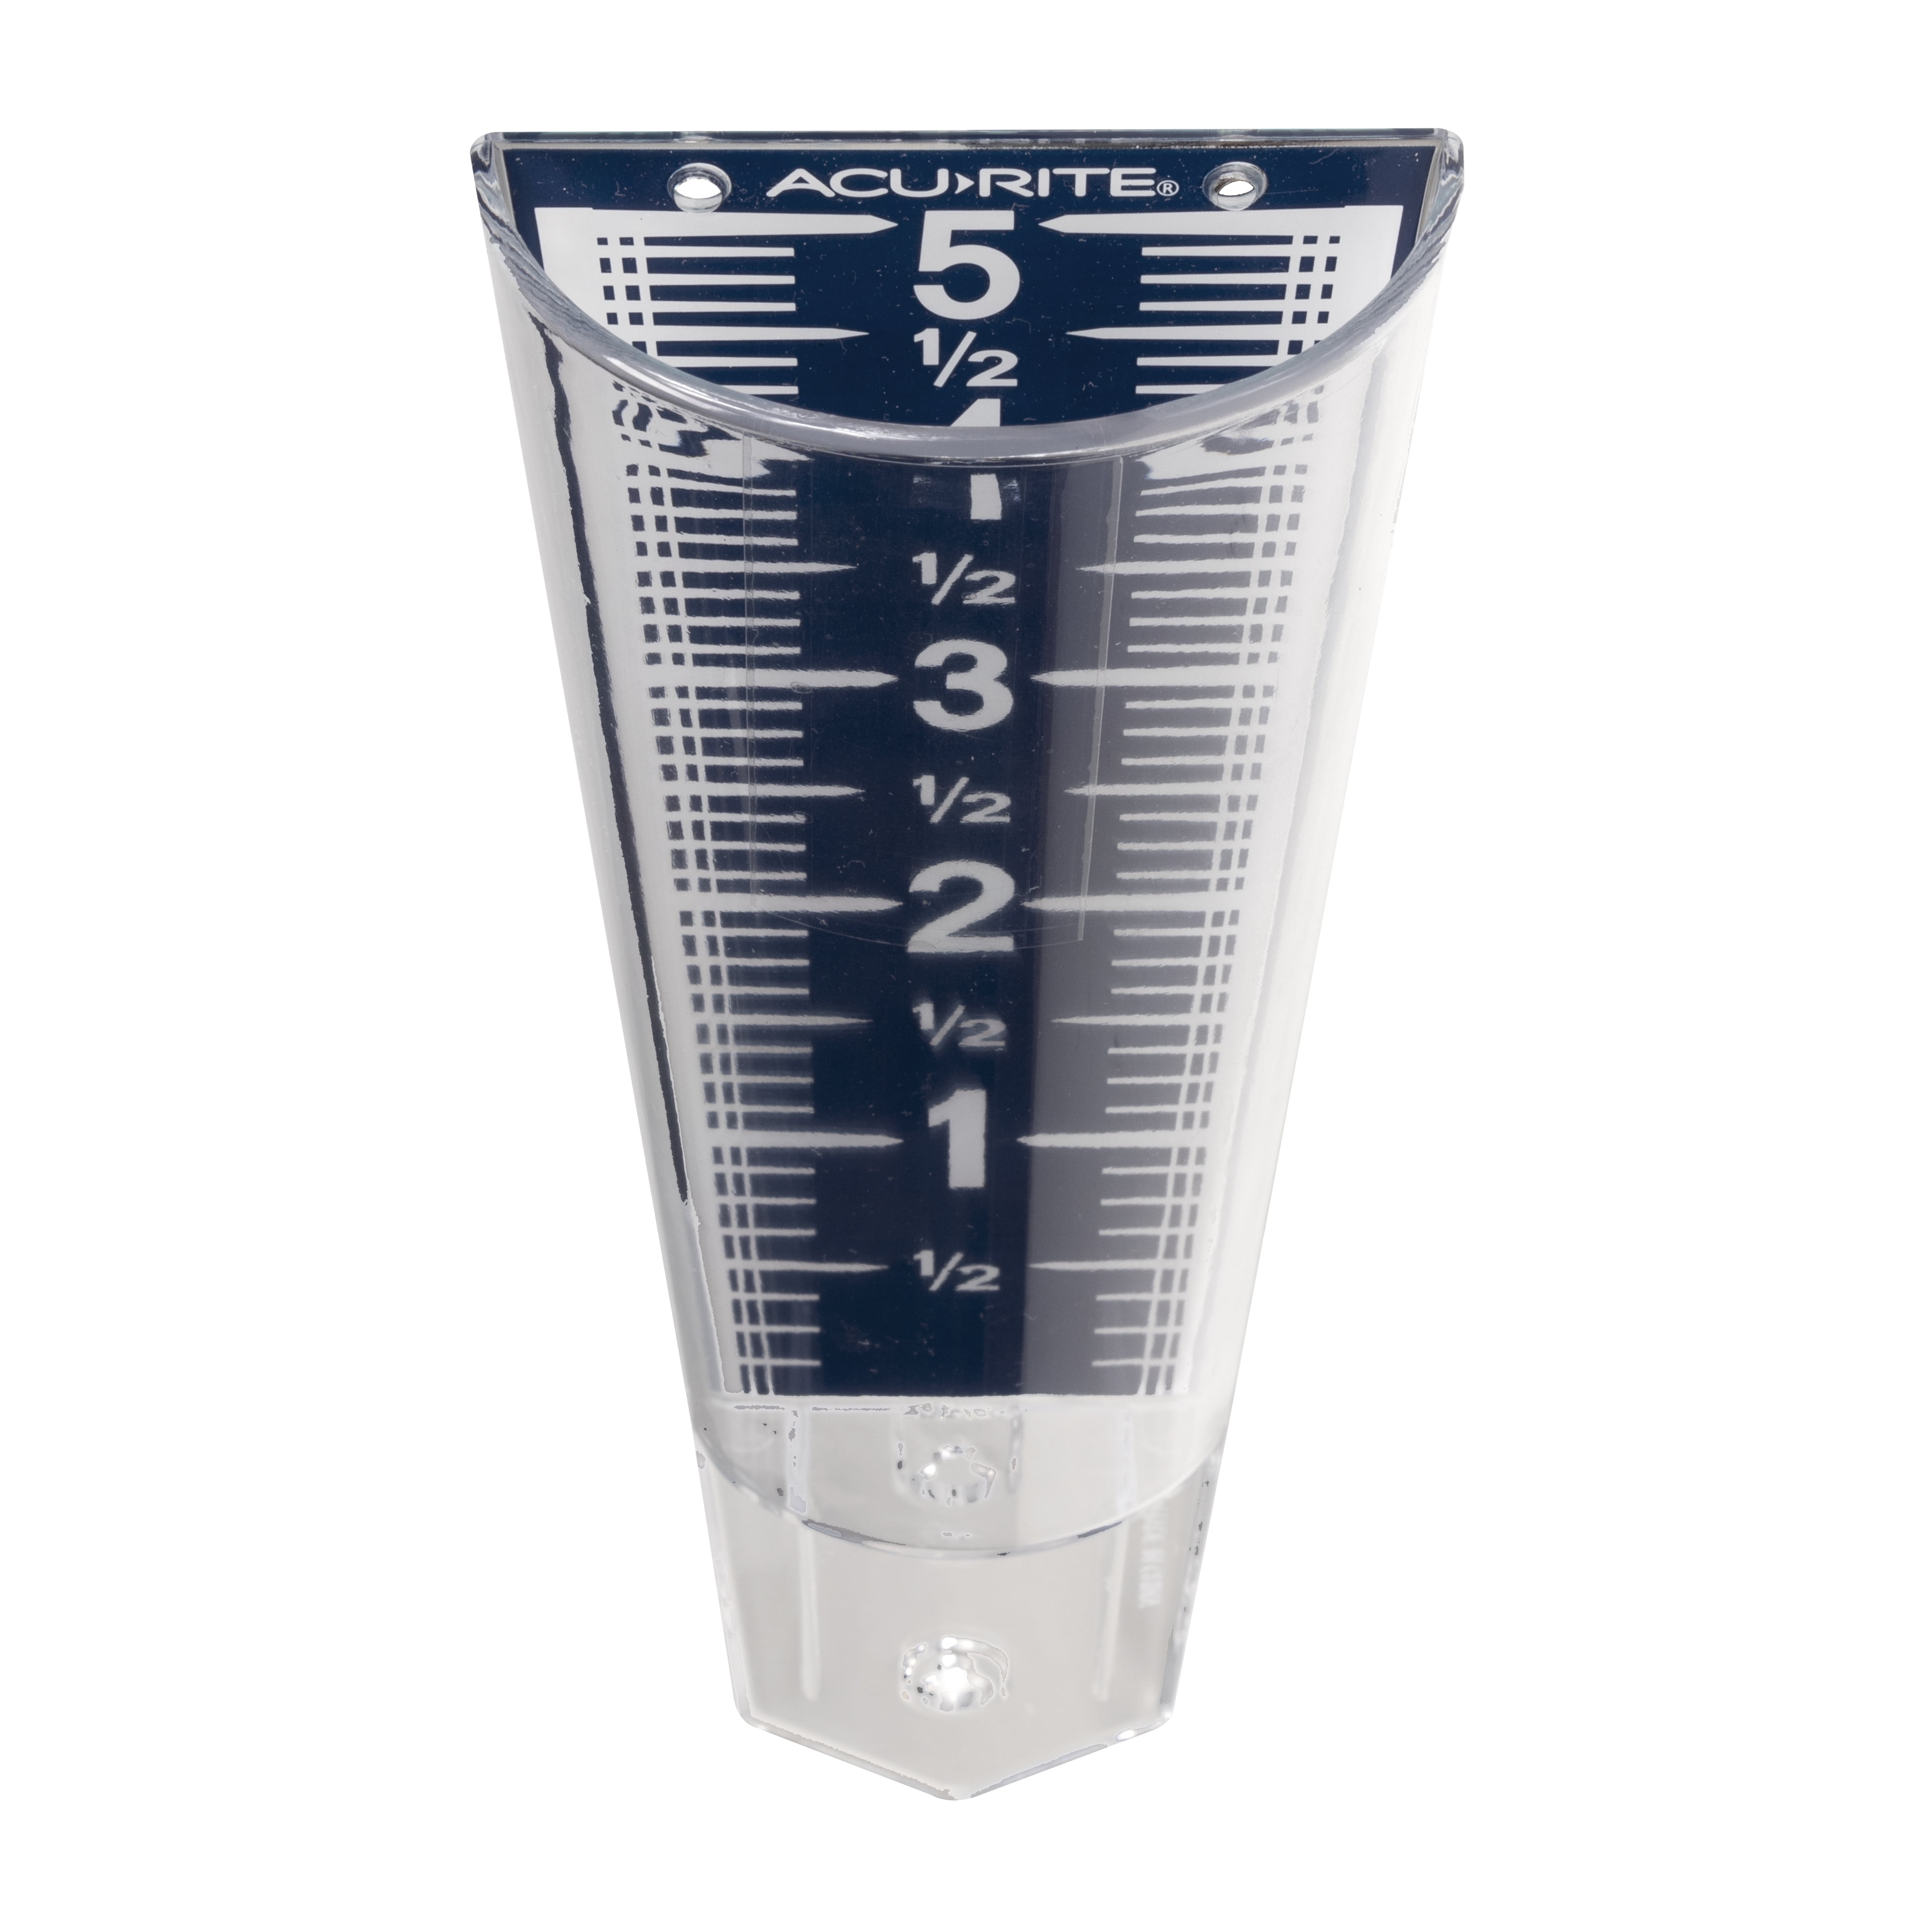 Acurite 5-Inch Capacity Easy Read Magnifying Rain Gauge Blue12.5-Inch NEW